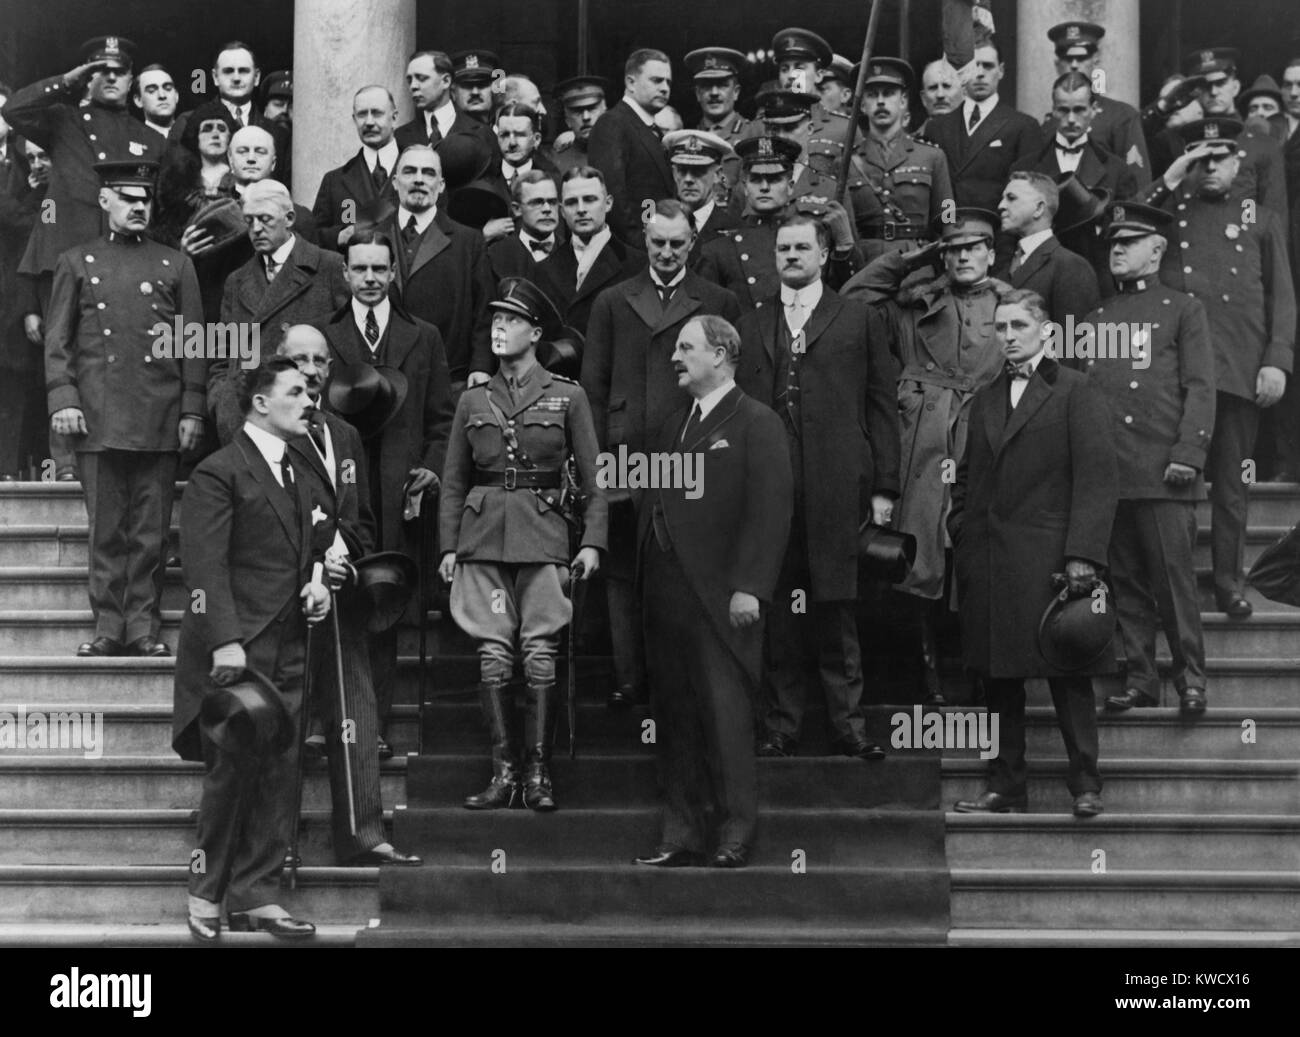 Prince of Wales, the future Edward VIII, of Britain, in New York City, 1919. Wearing a military uniform, and standing on the steps of the Woolworth Building, he is surrounded by notable American men (BSLOC 2017 1 86) Stock Photo